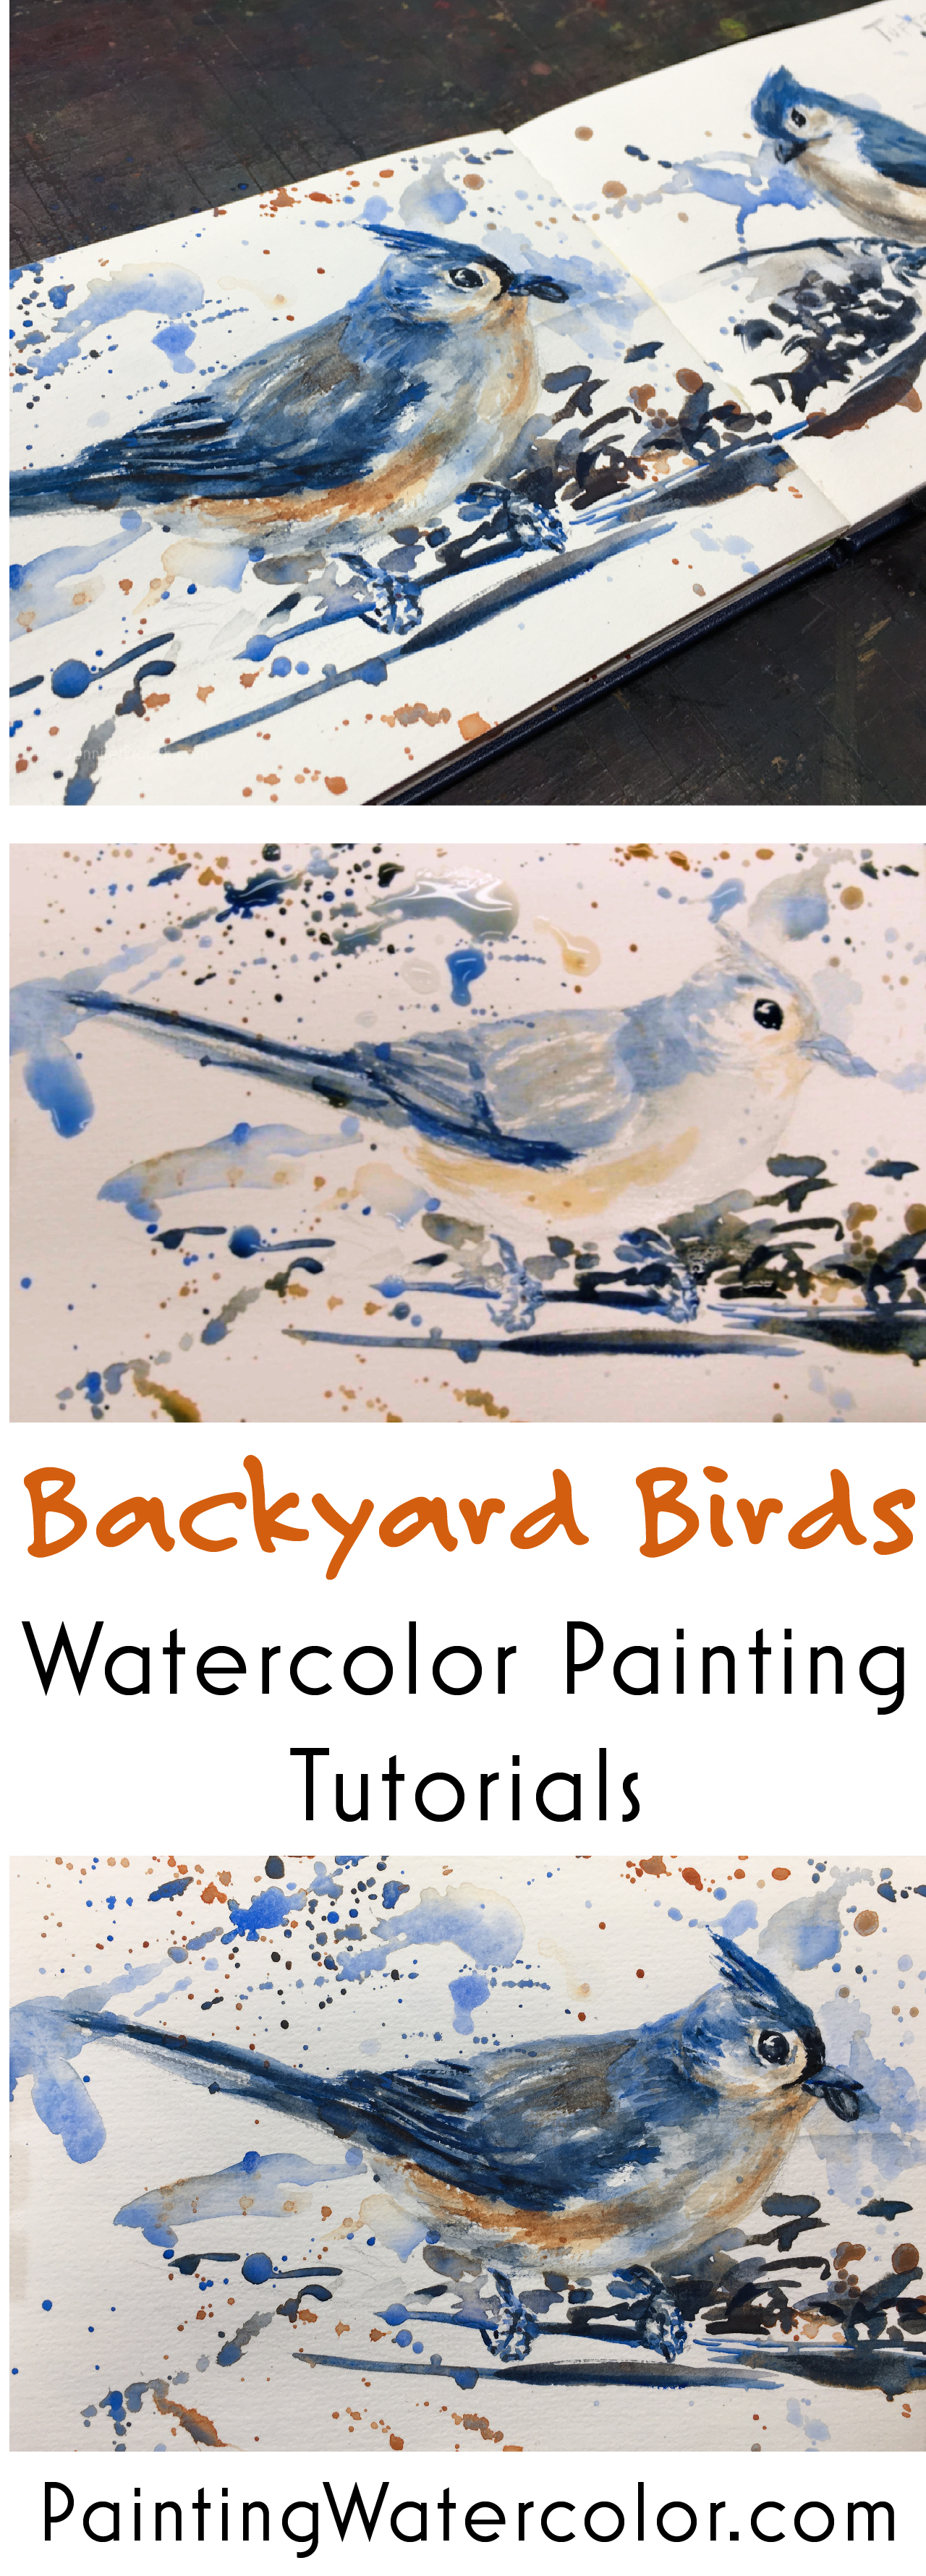 Backyard Bird Sketch, Tufted Titmouse 2 watercolor painting tutorial by Jennifer Branch